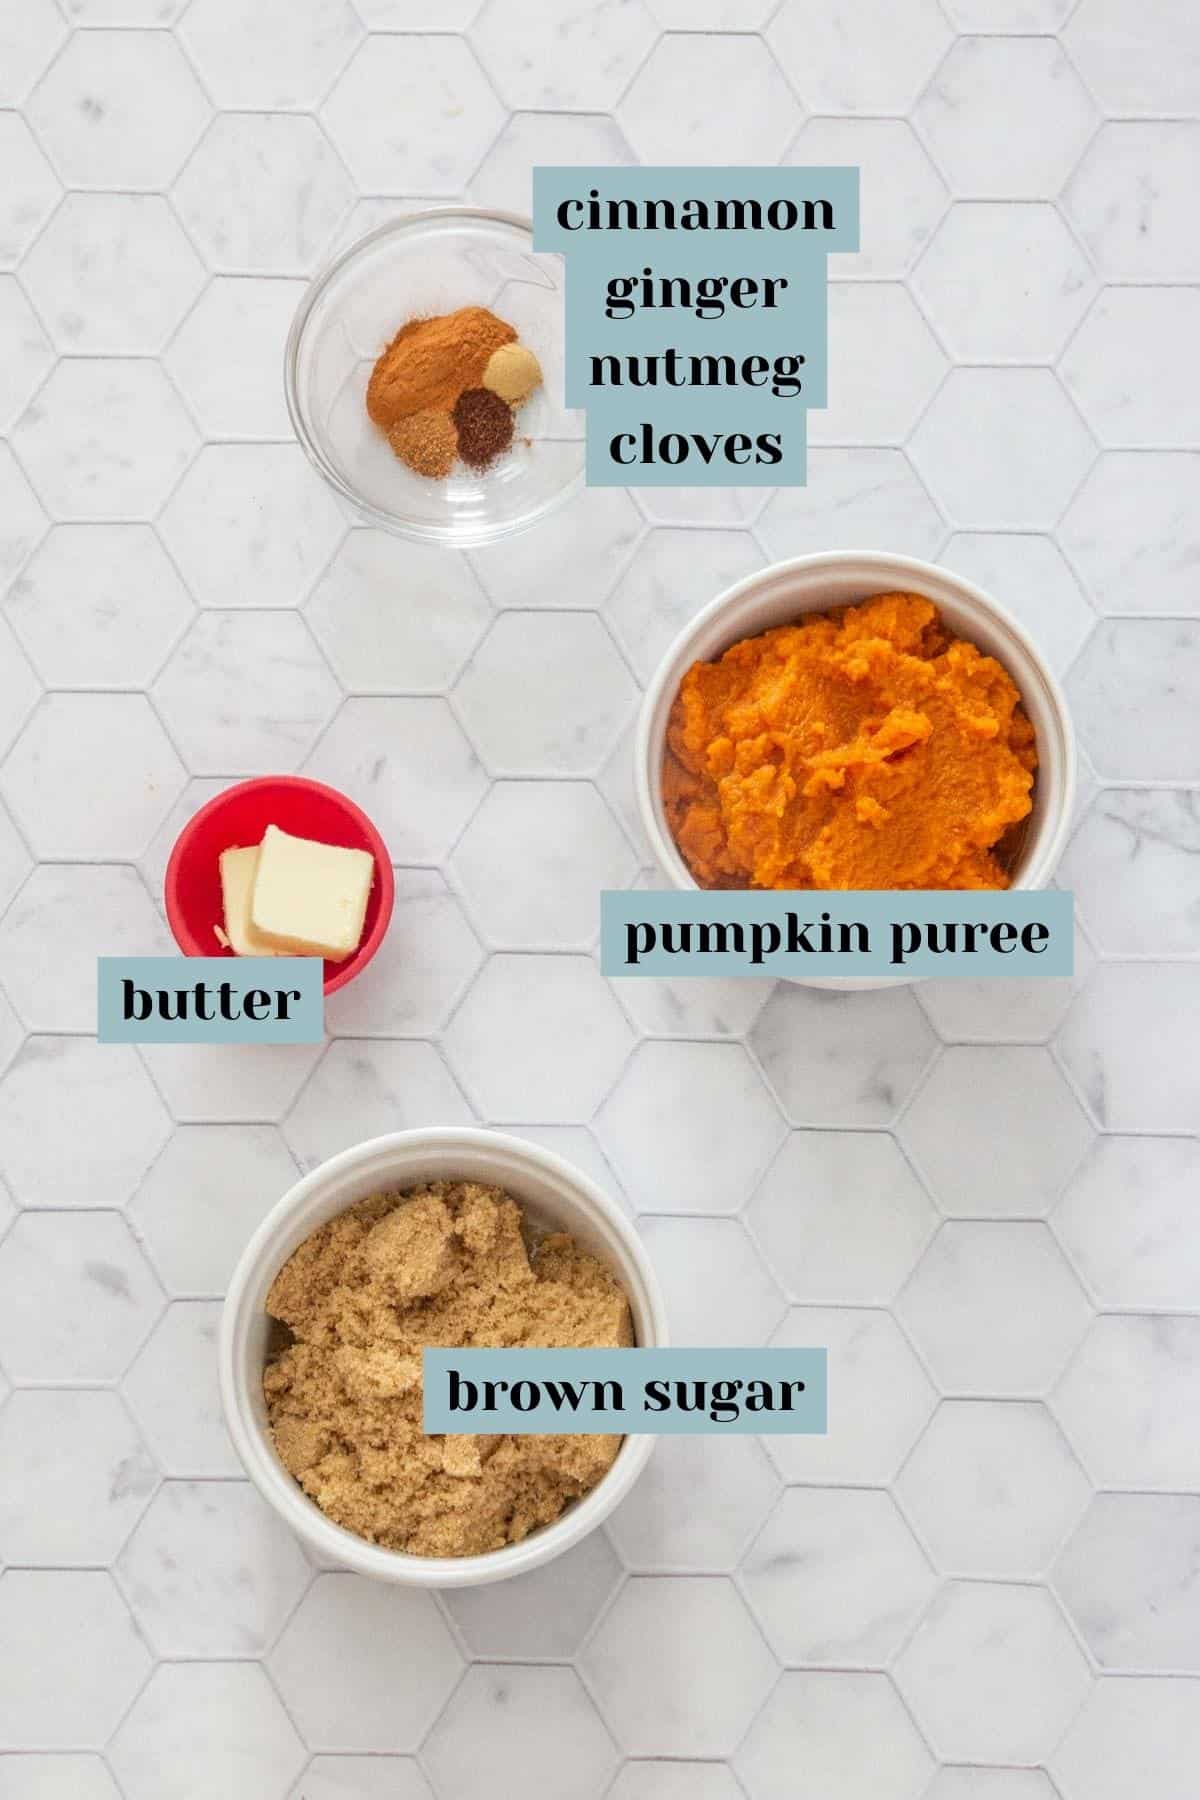 Ingredients for pumpkin empanada filling on a tile surface with labels.